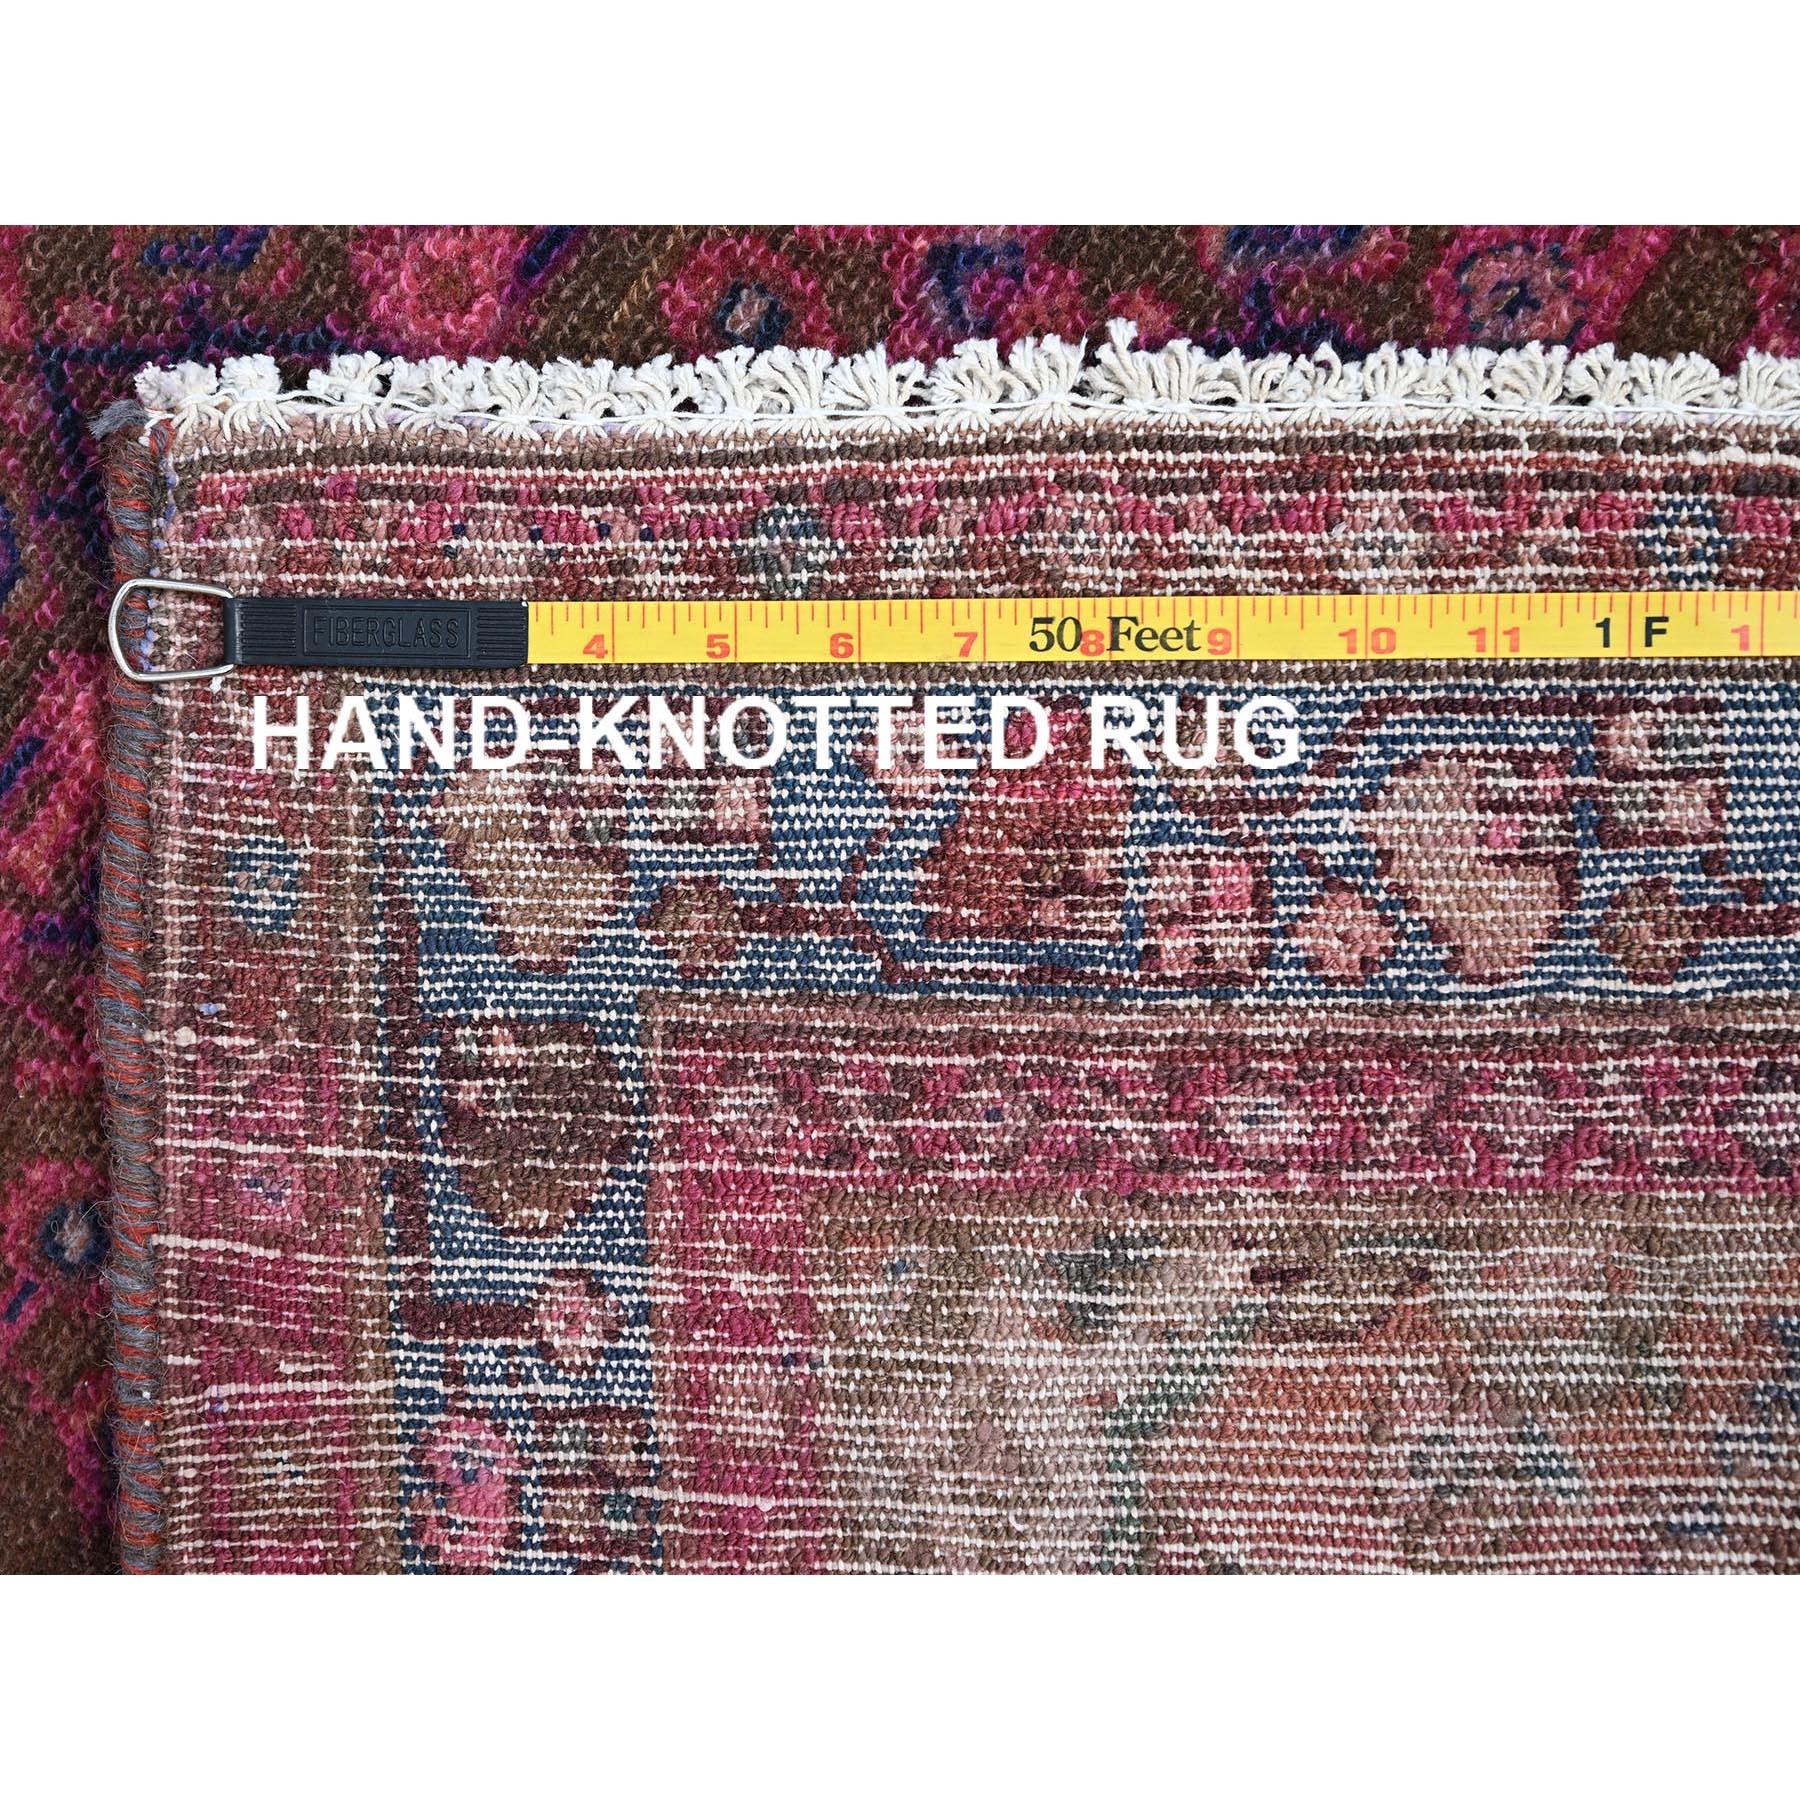 This fabulous Hand-Knotted carpet has been created and designed for extra strength and durability. This rug has been handcrafted for weeks in the traditional method that is used to make
Exact Rug Size in Feet and Inches : 3'4